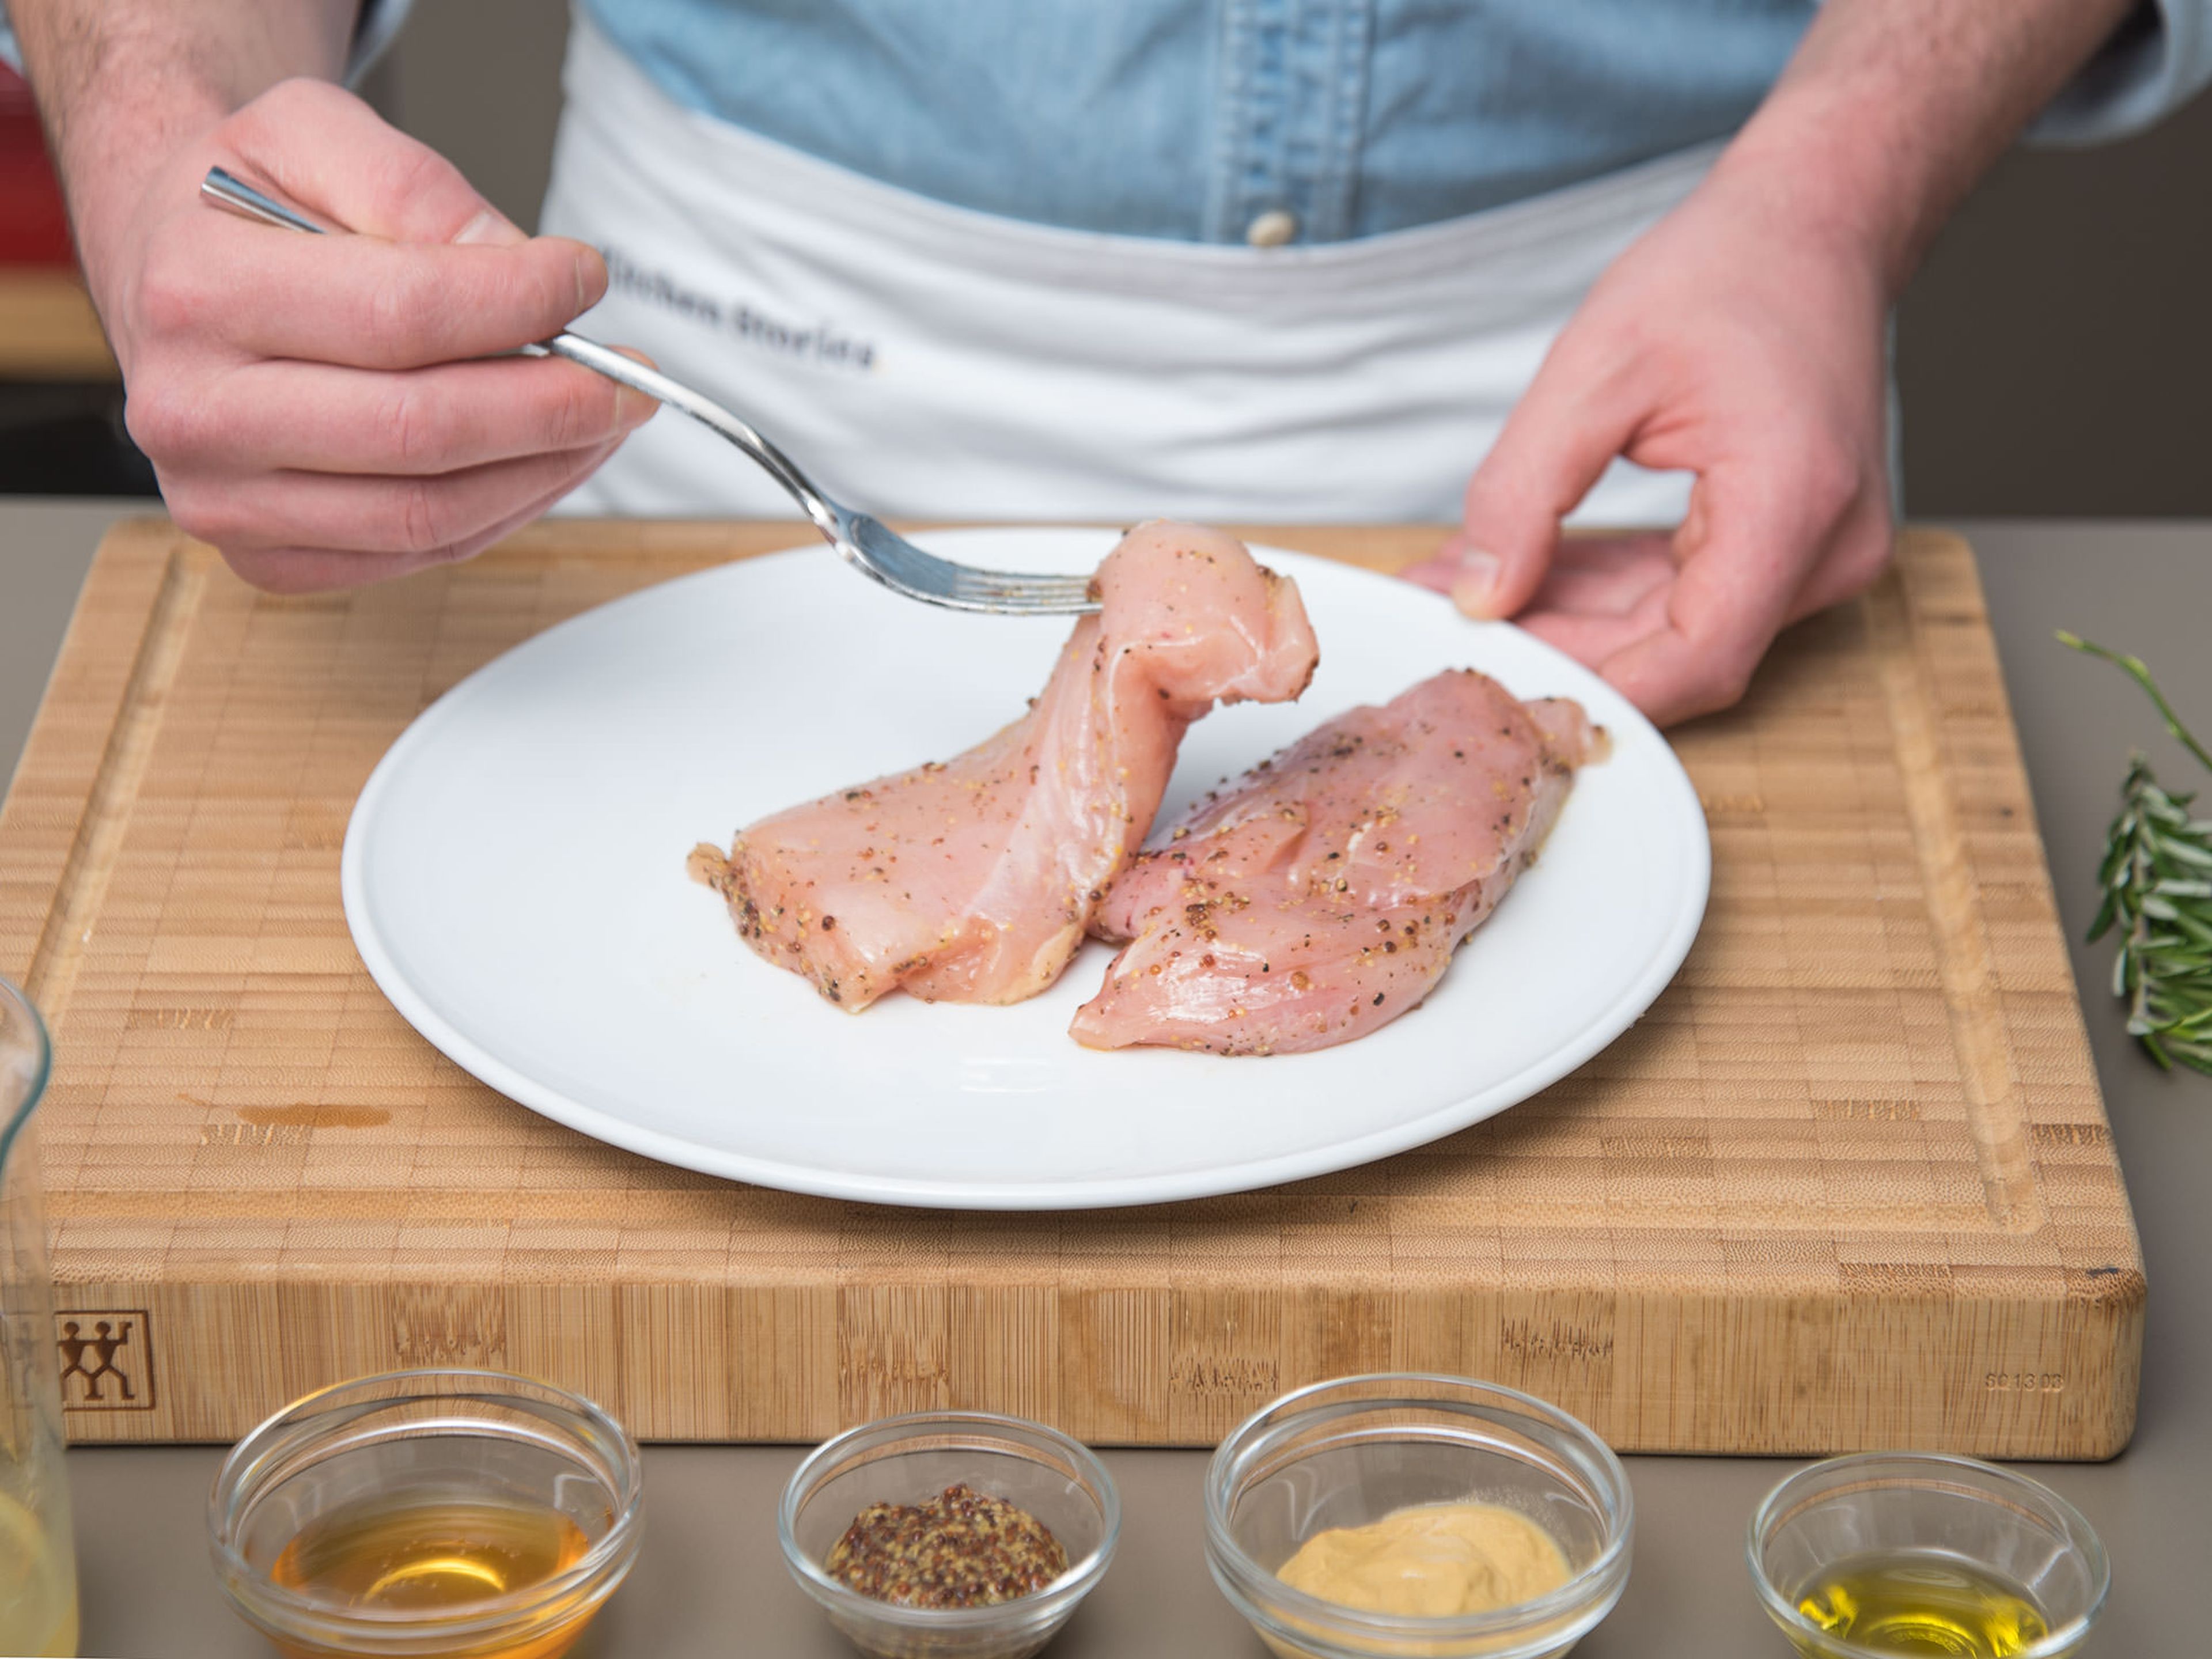 Wash chicken breast and pat dry. Add a portion of the whole grain mustard and olive oil to a large bowl and stir to combine. Season with salt and pepper. Toss chicken breast in the mustard mixture, transfer to a plate, and let marinate for at least 30 min.